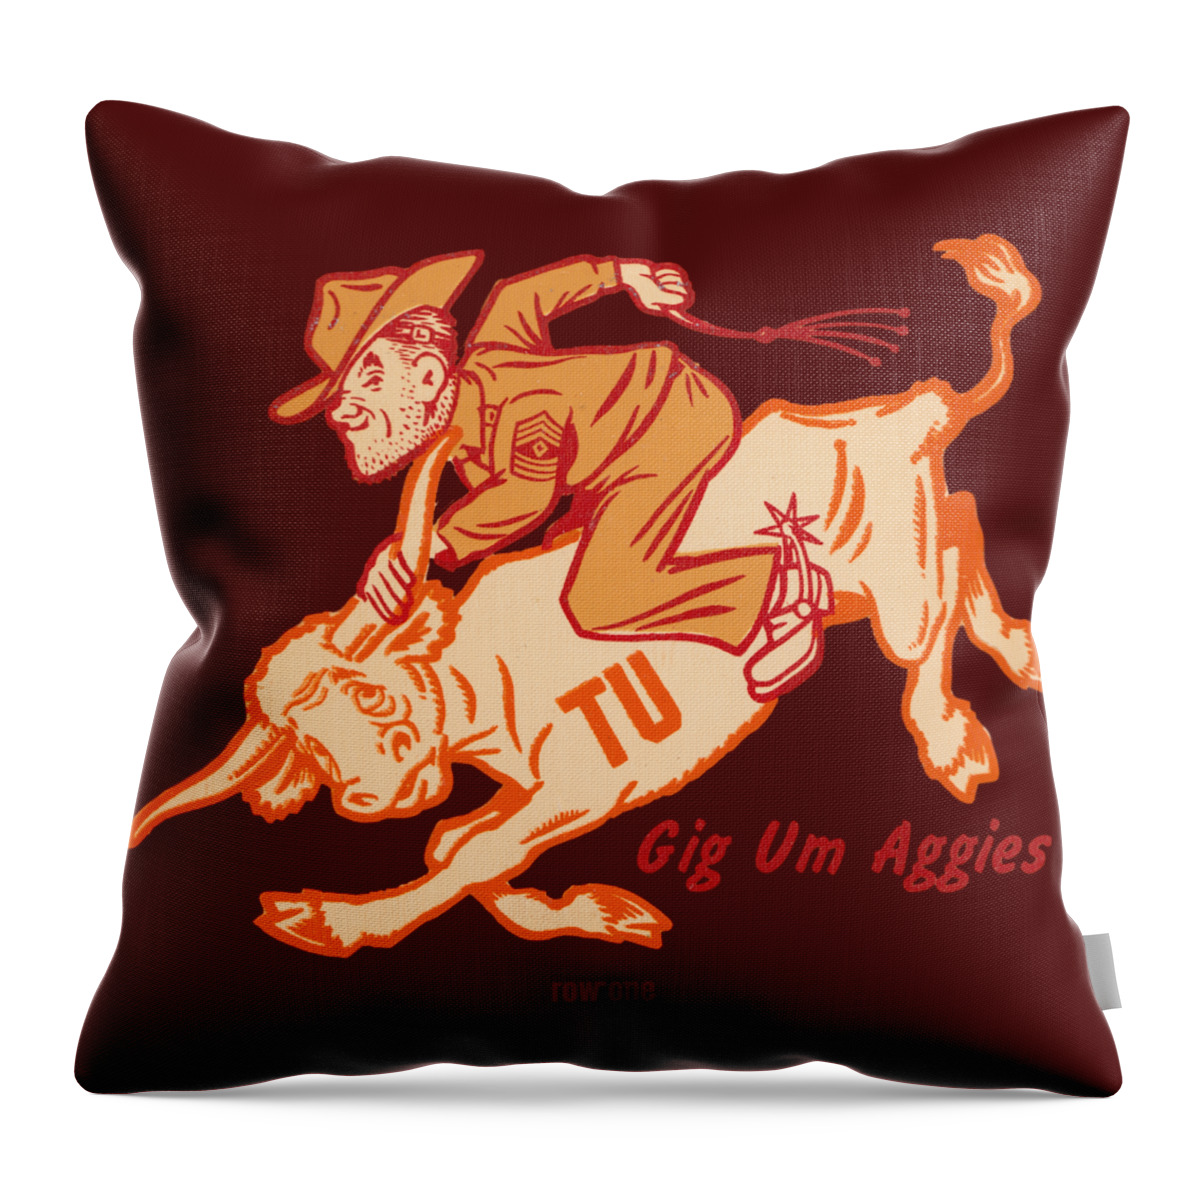 Gig Um Aggies Throw Pillow featuring the mixed media Gig Um Aggies by Row One Brand